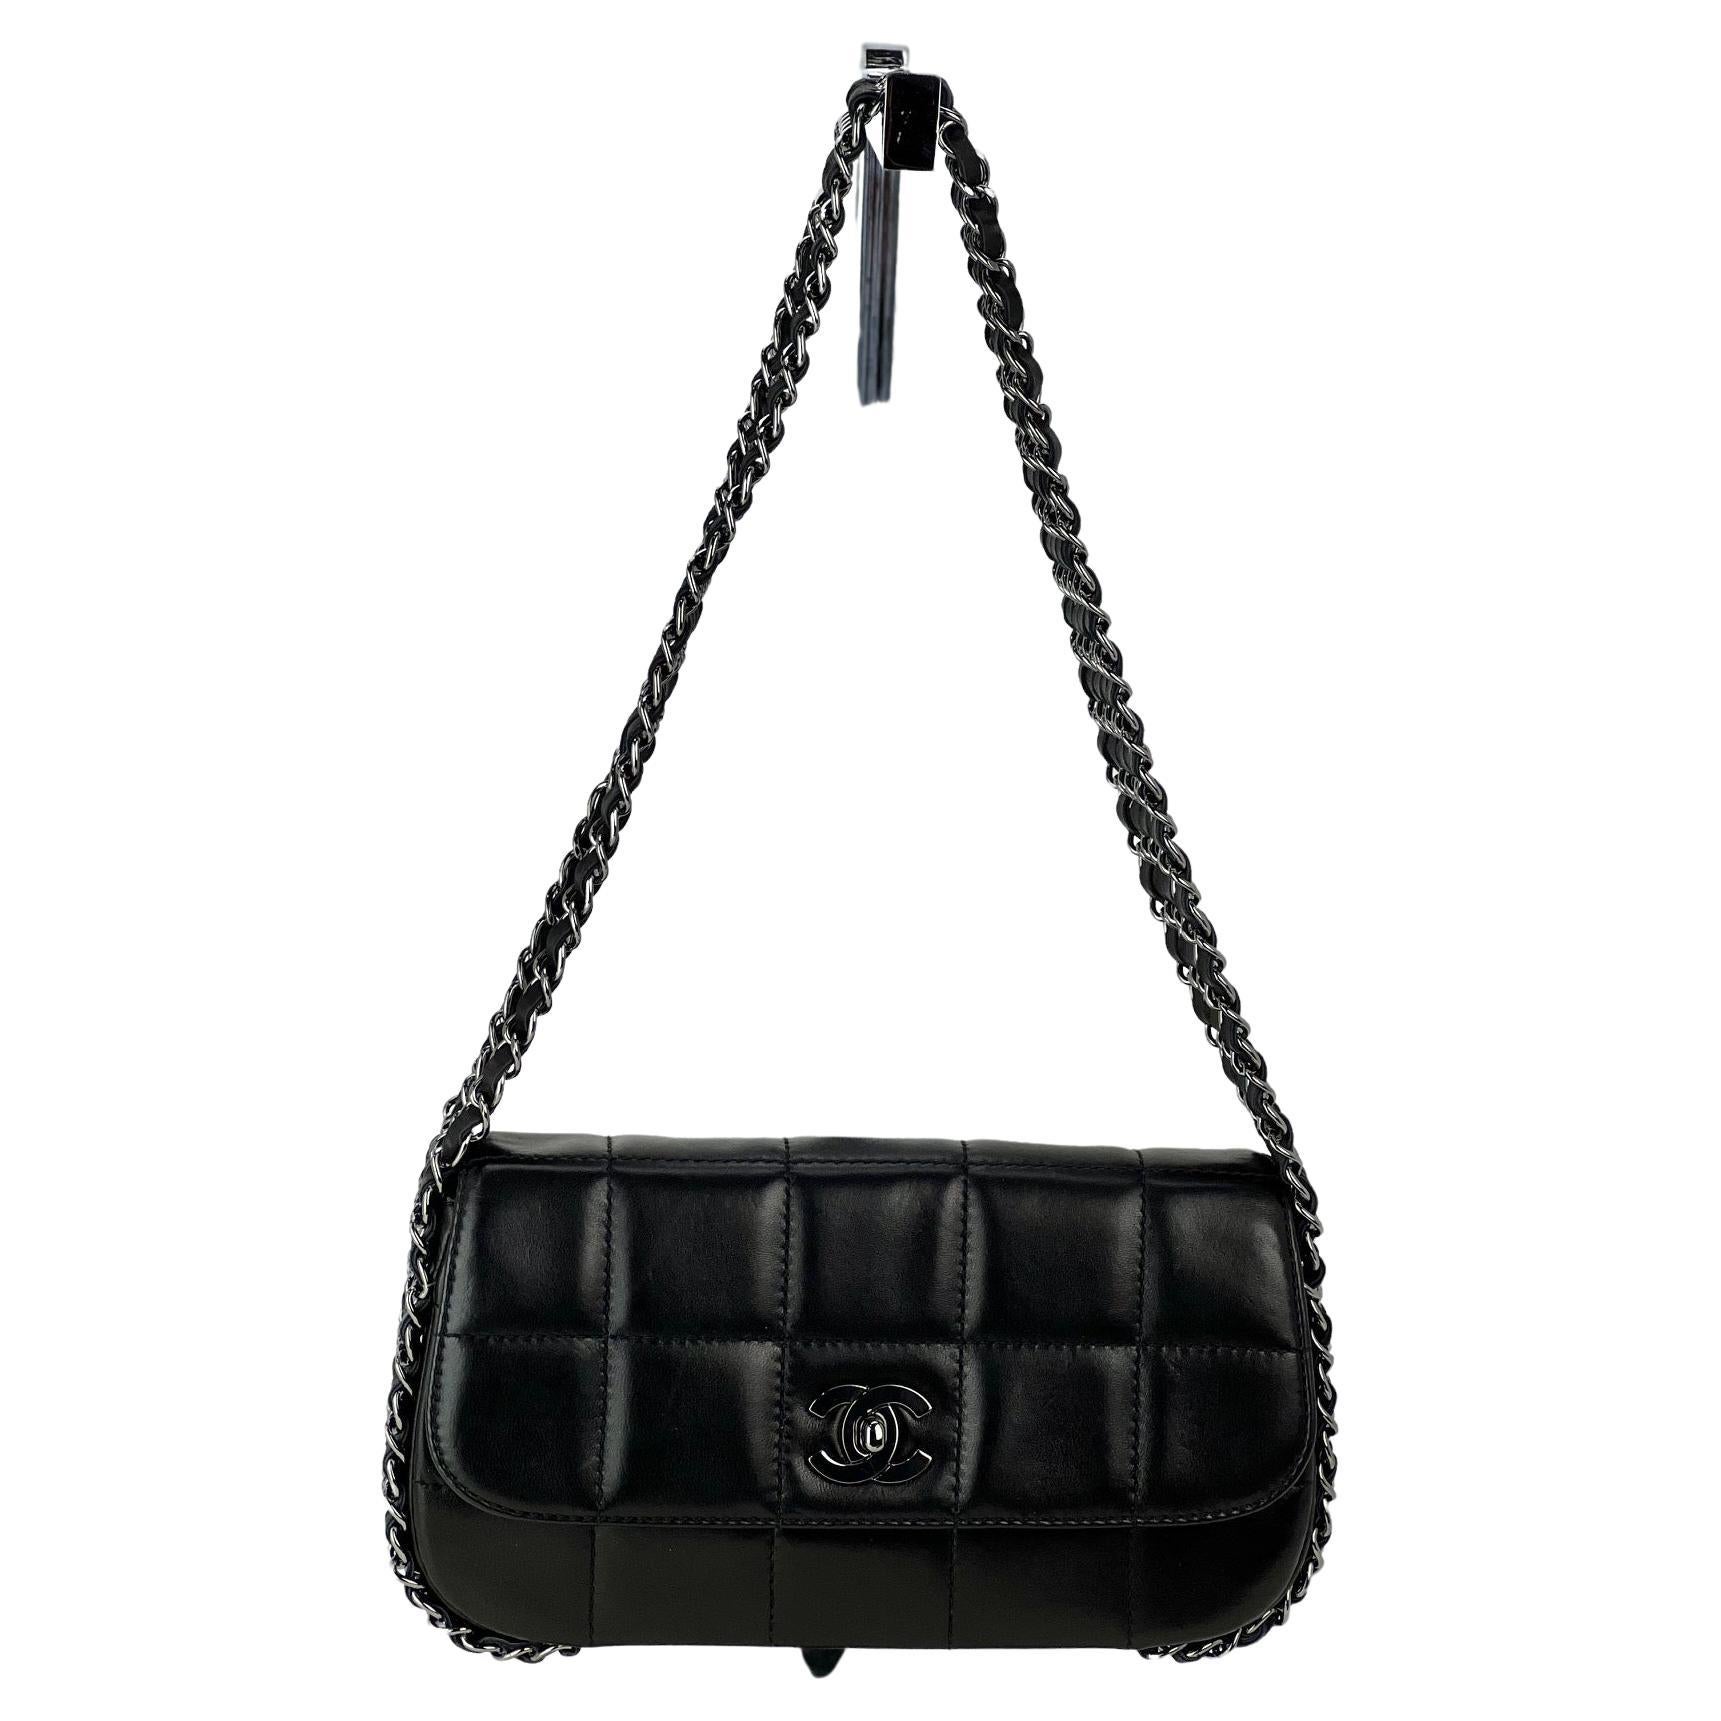 CHANEL Chocolate Bar Quilted Lambskin 5 Chain Flap Black Bag